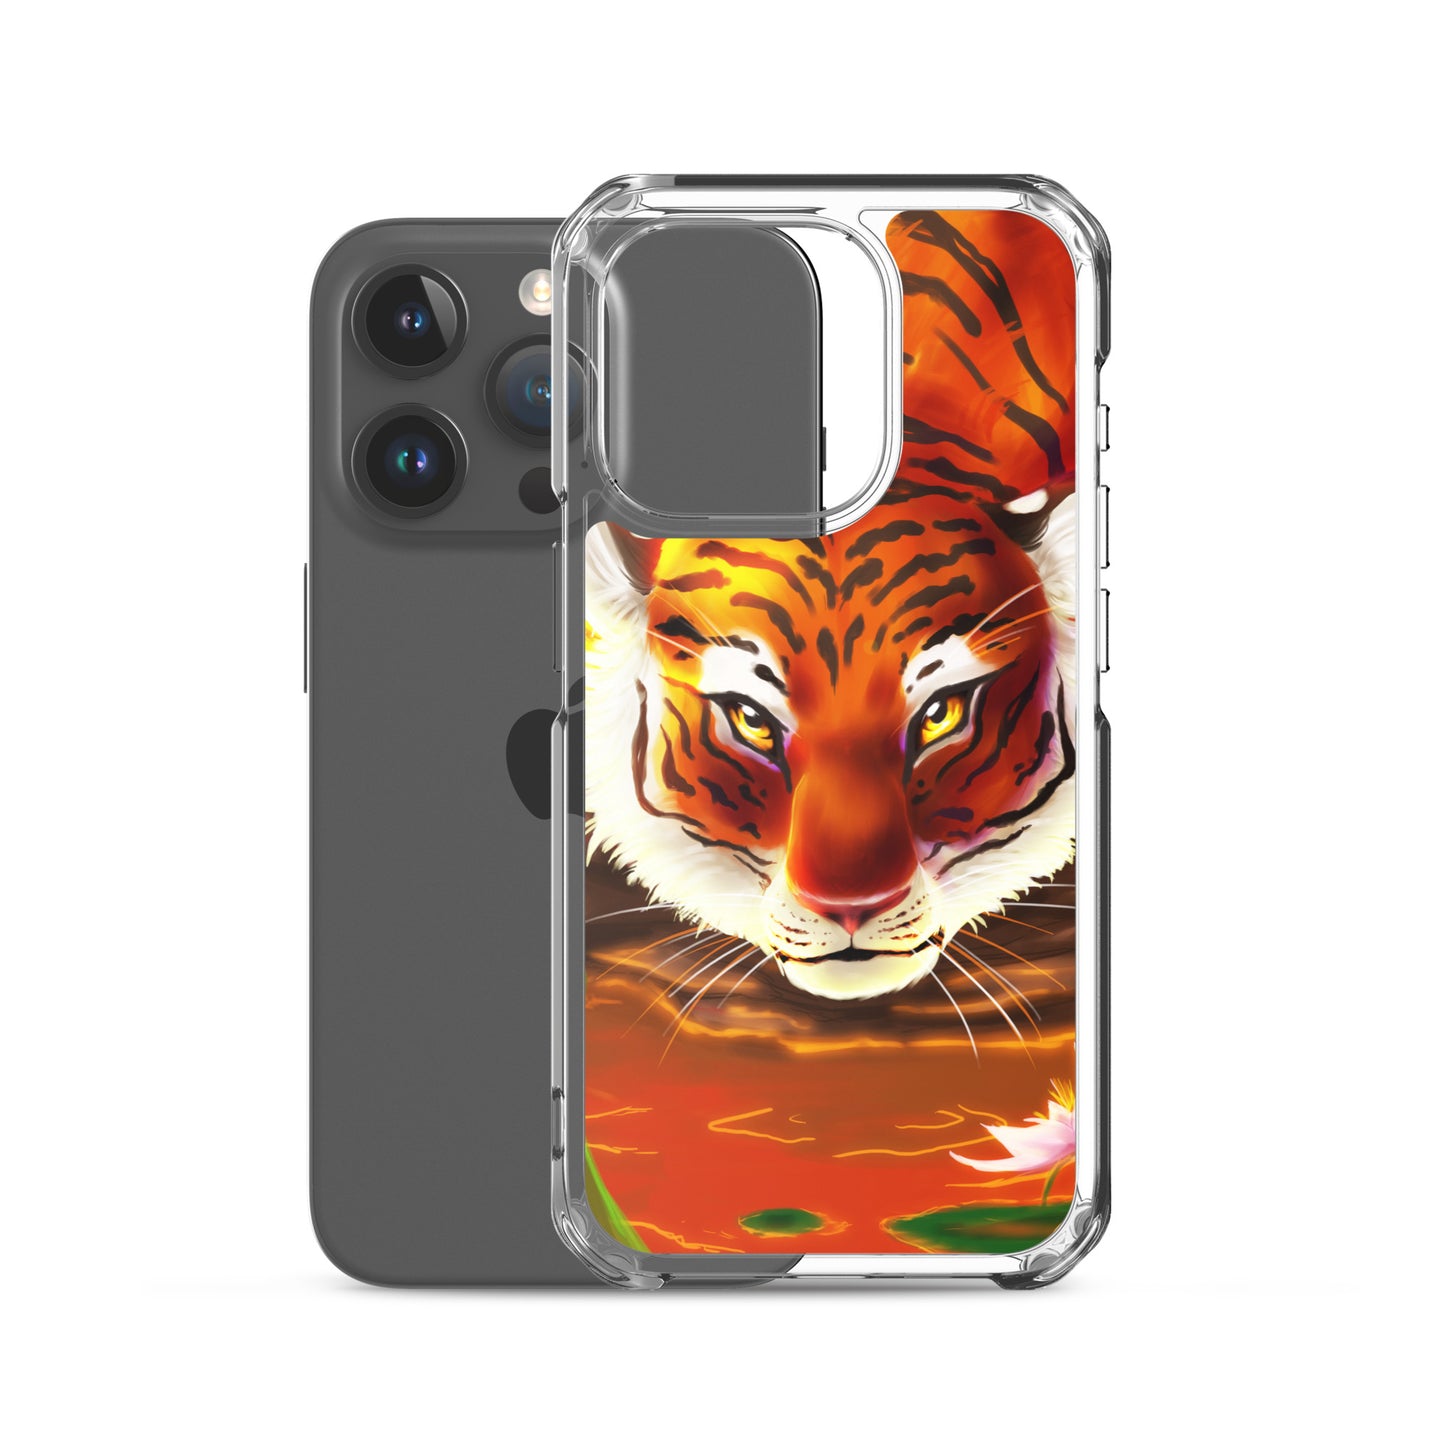 Eyes of the Tiger iPhone Case